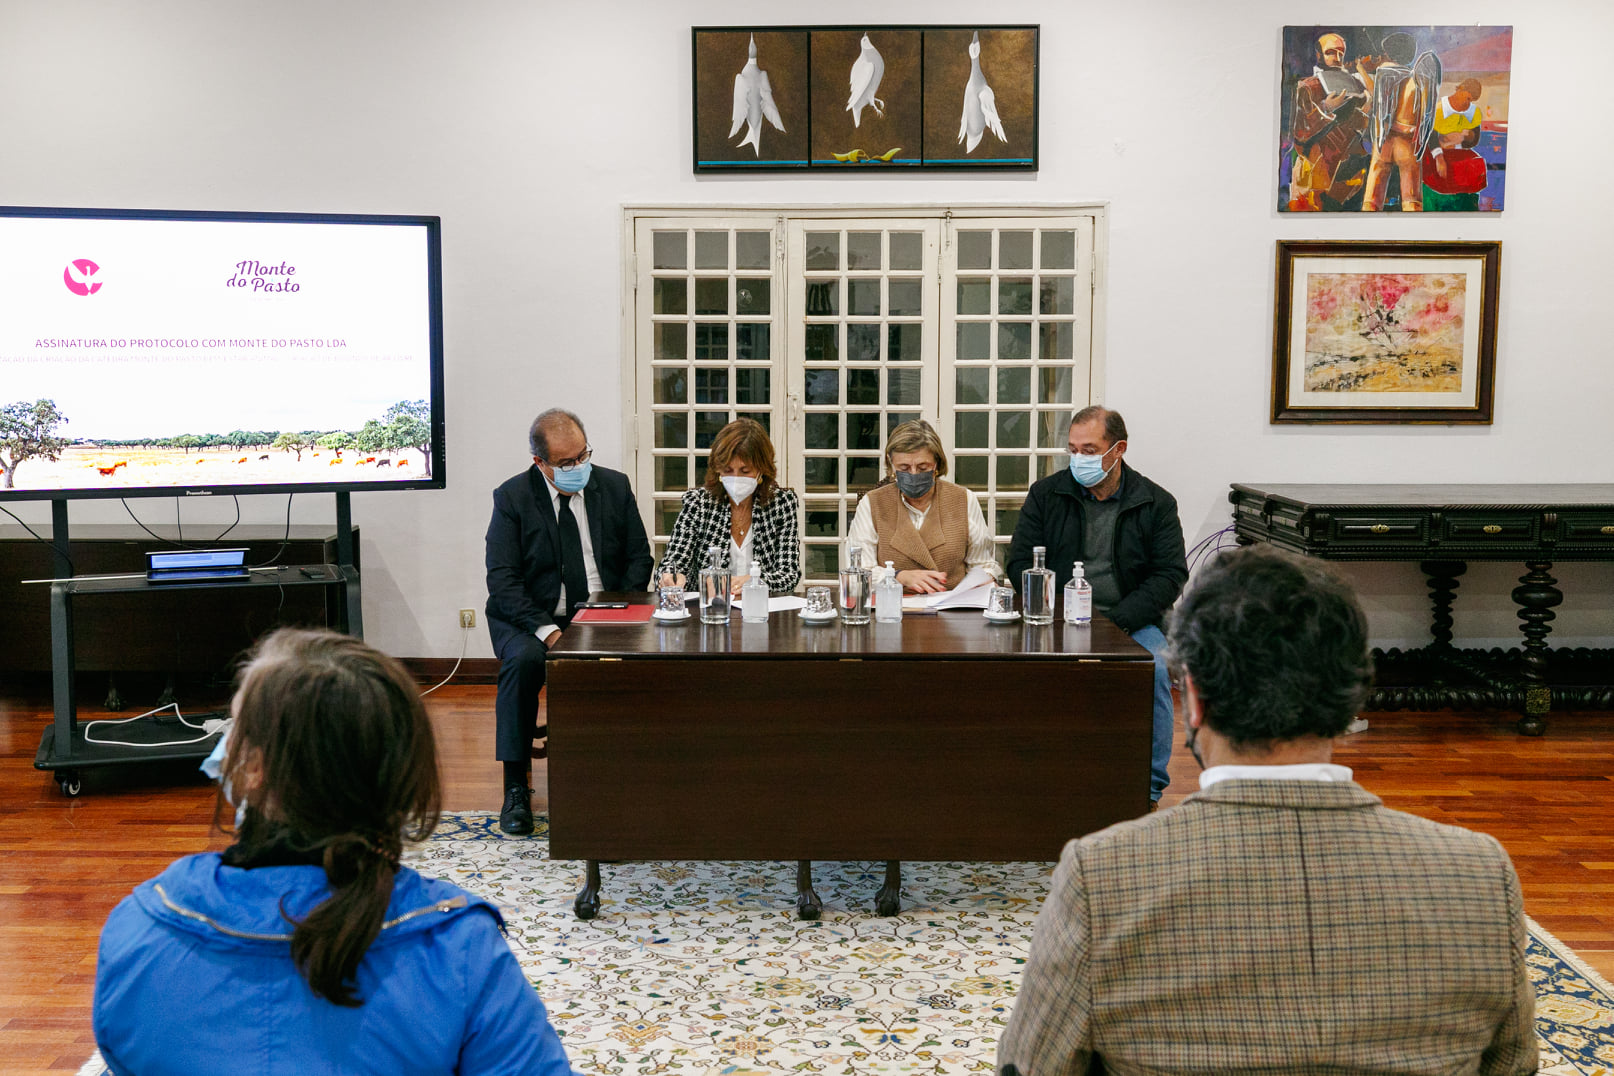 Monde do Pasto - Monte do Pasto is developing an innovative project
                        of sustainable meat production in partnership with the Portuguese
                        Universities of Évora and Minho